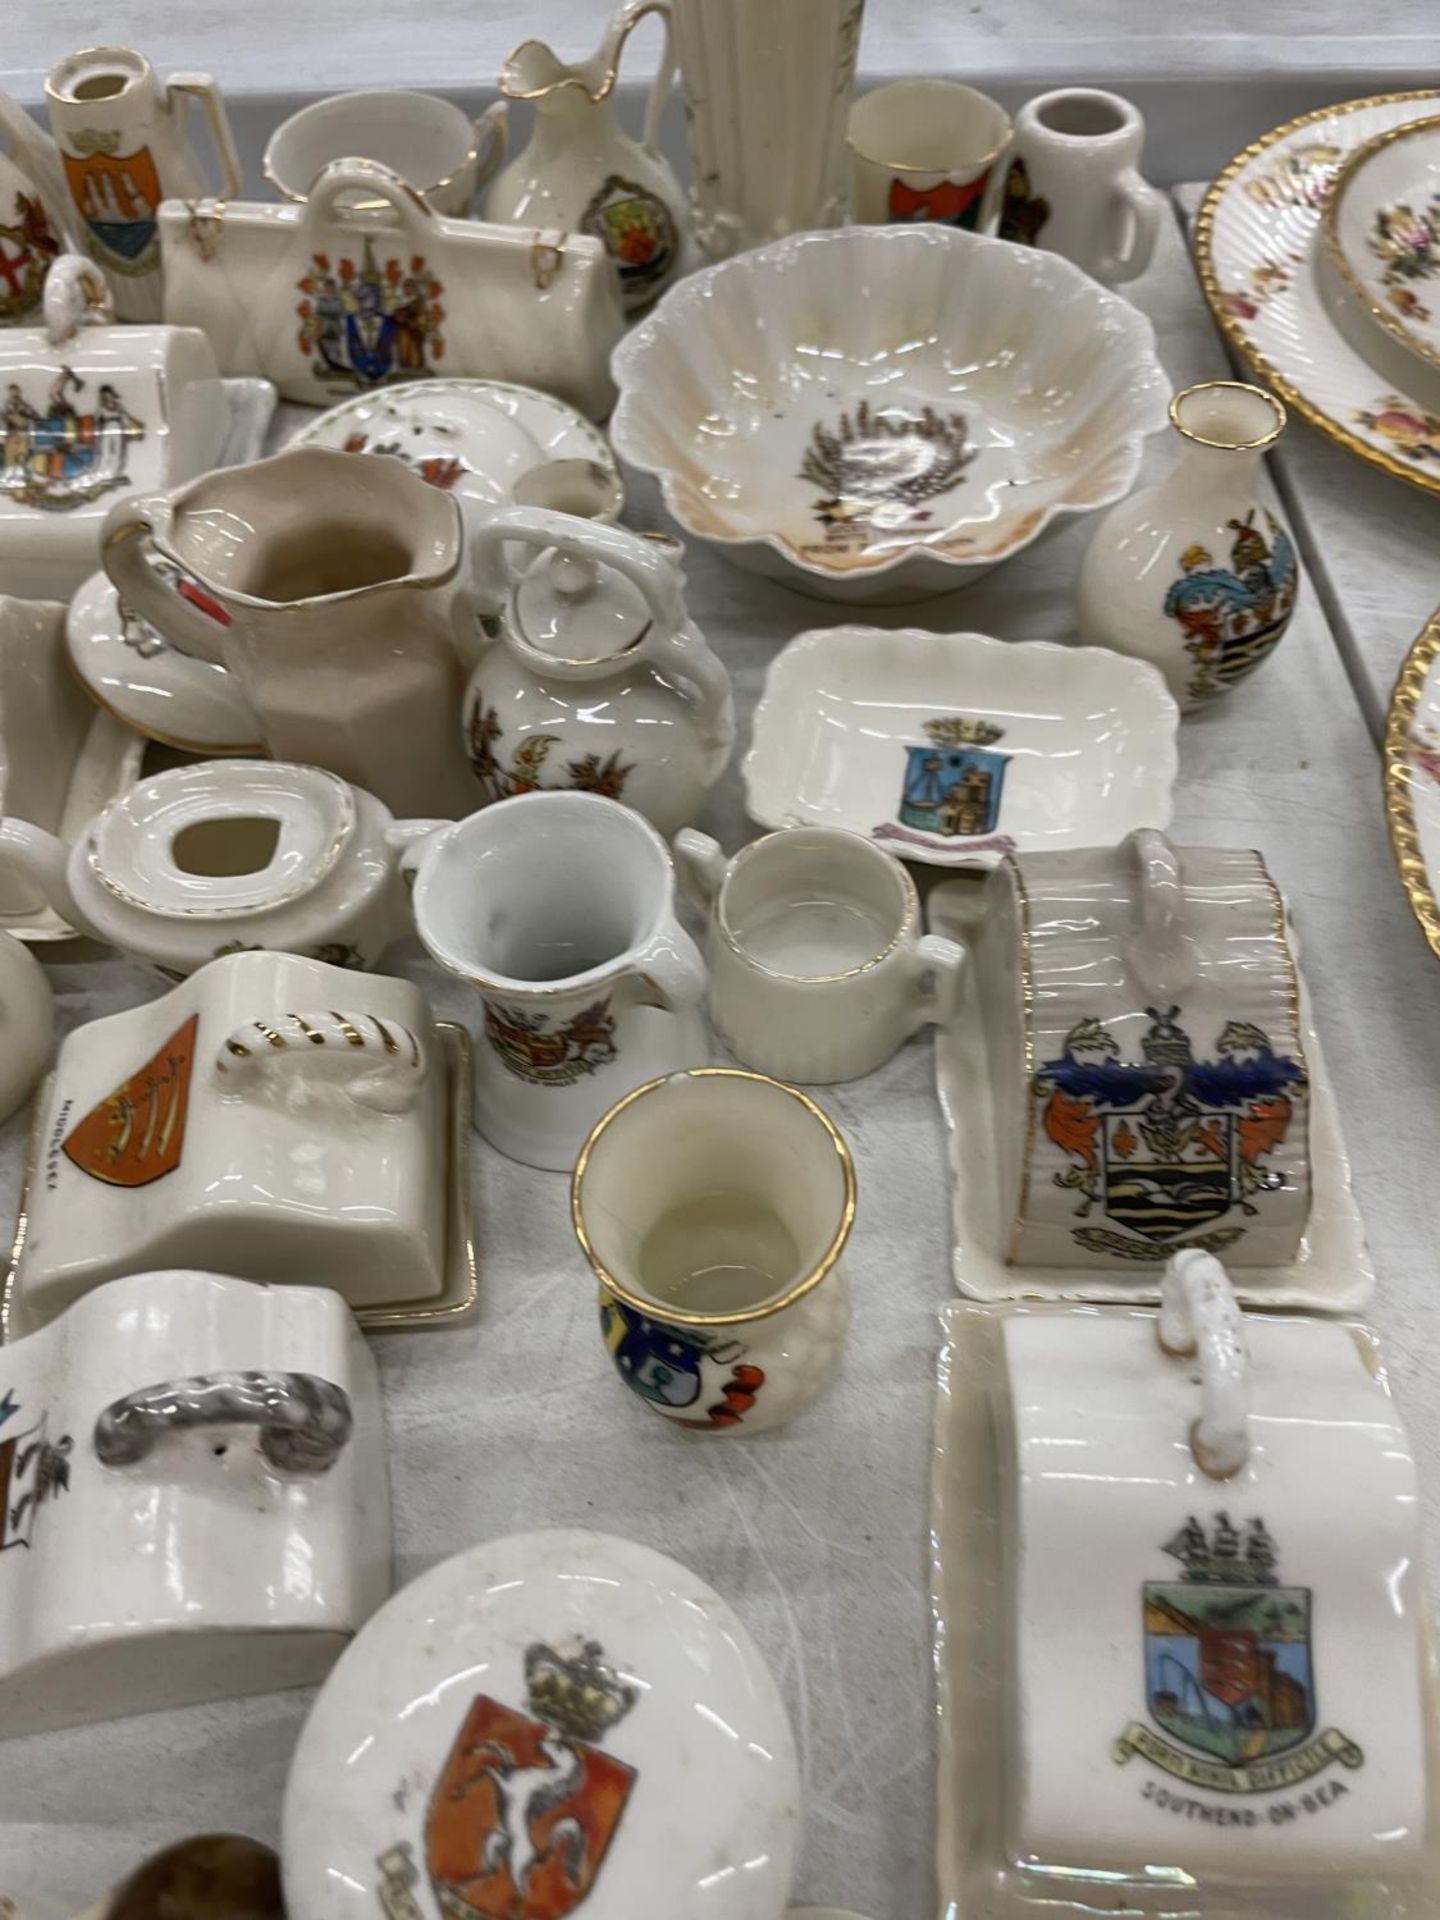 A LARGE QUANTITY OF CRESTED WARE TO INCLUDE MINIATURE CHEESE DISHES, PLATES, VASES, CUPS, JUGS, ETC - Image 5 of 11